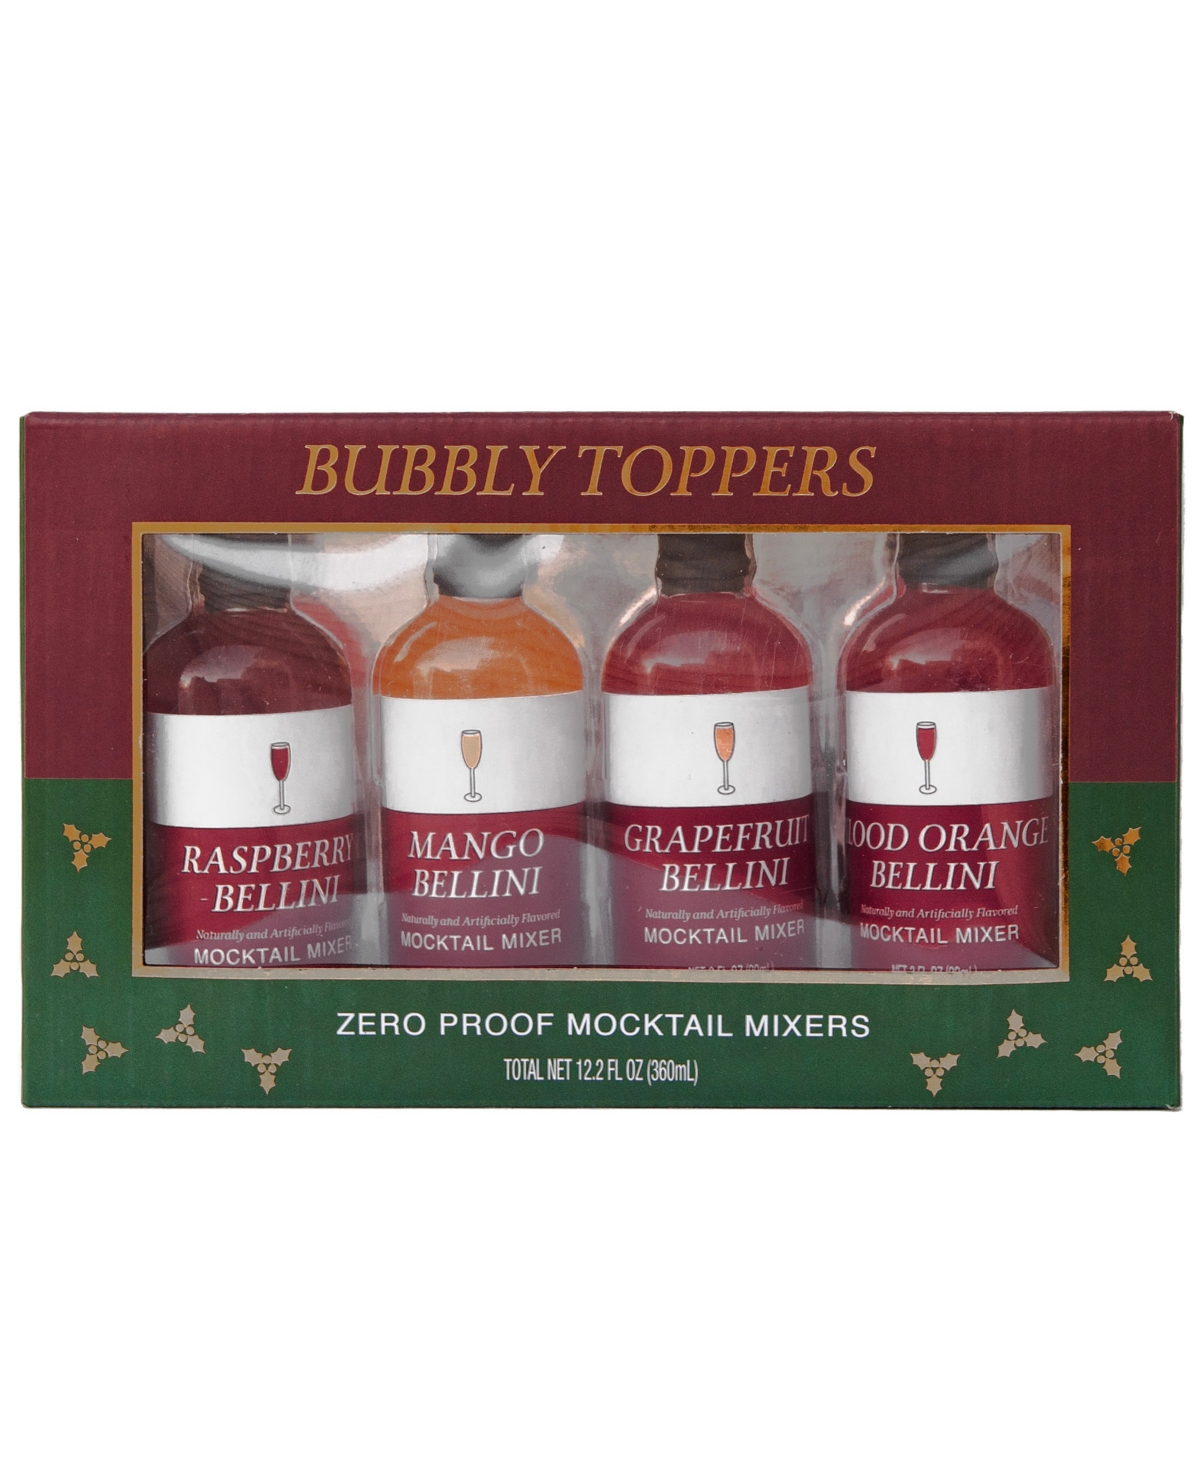 4-Pack Ten Acres Bubbly Toppers Gift Set (Zero Proof Mocktail Mixers) $1.60 or 12-Pack Holiday Mixers $2.80 at Macy's w/ Free Store Pickup or Free S&H w/ $25+